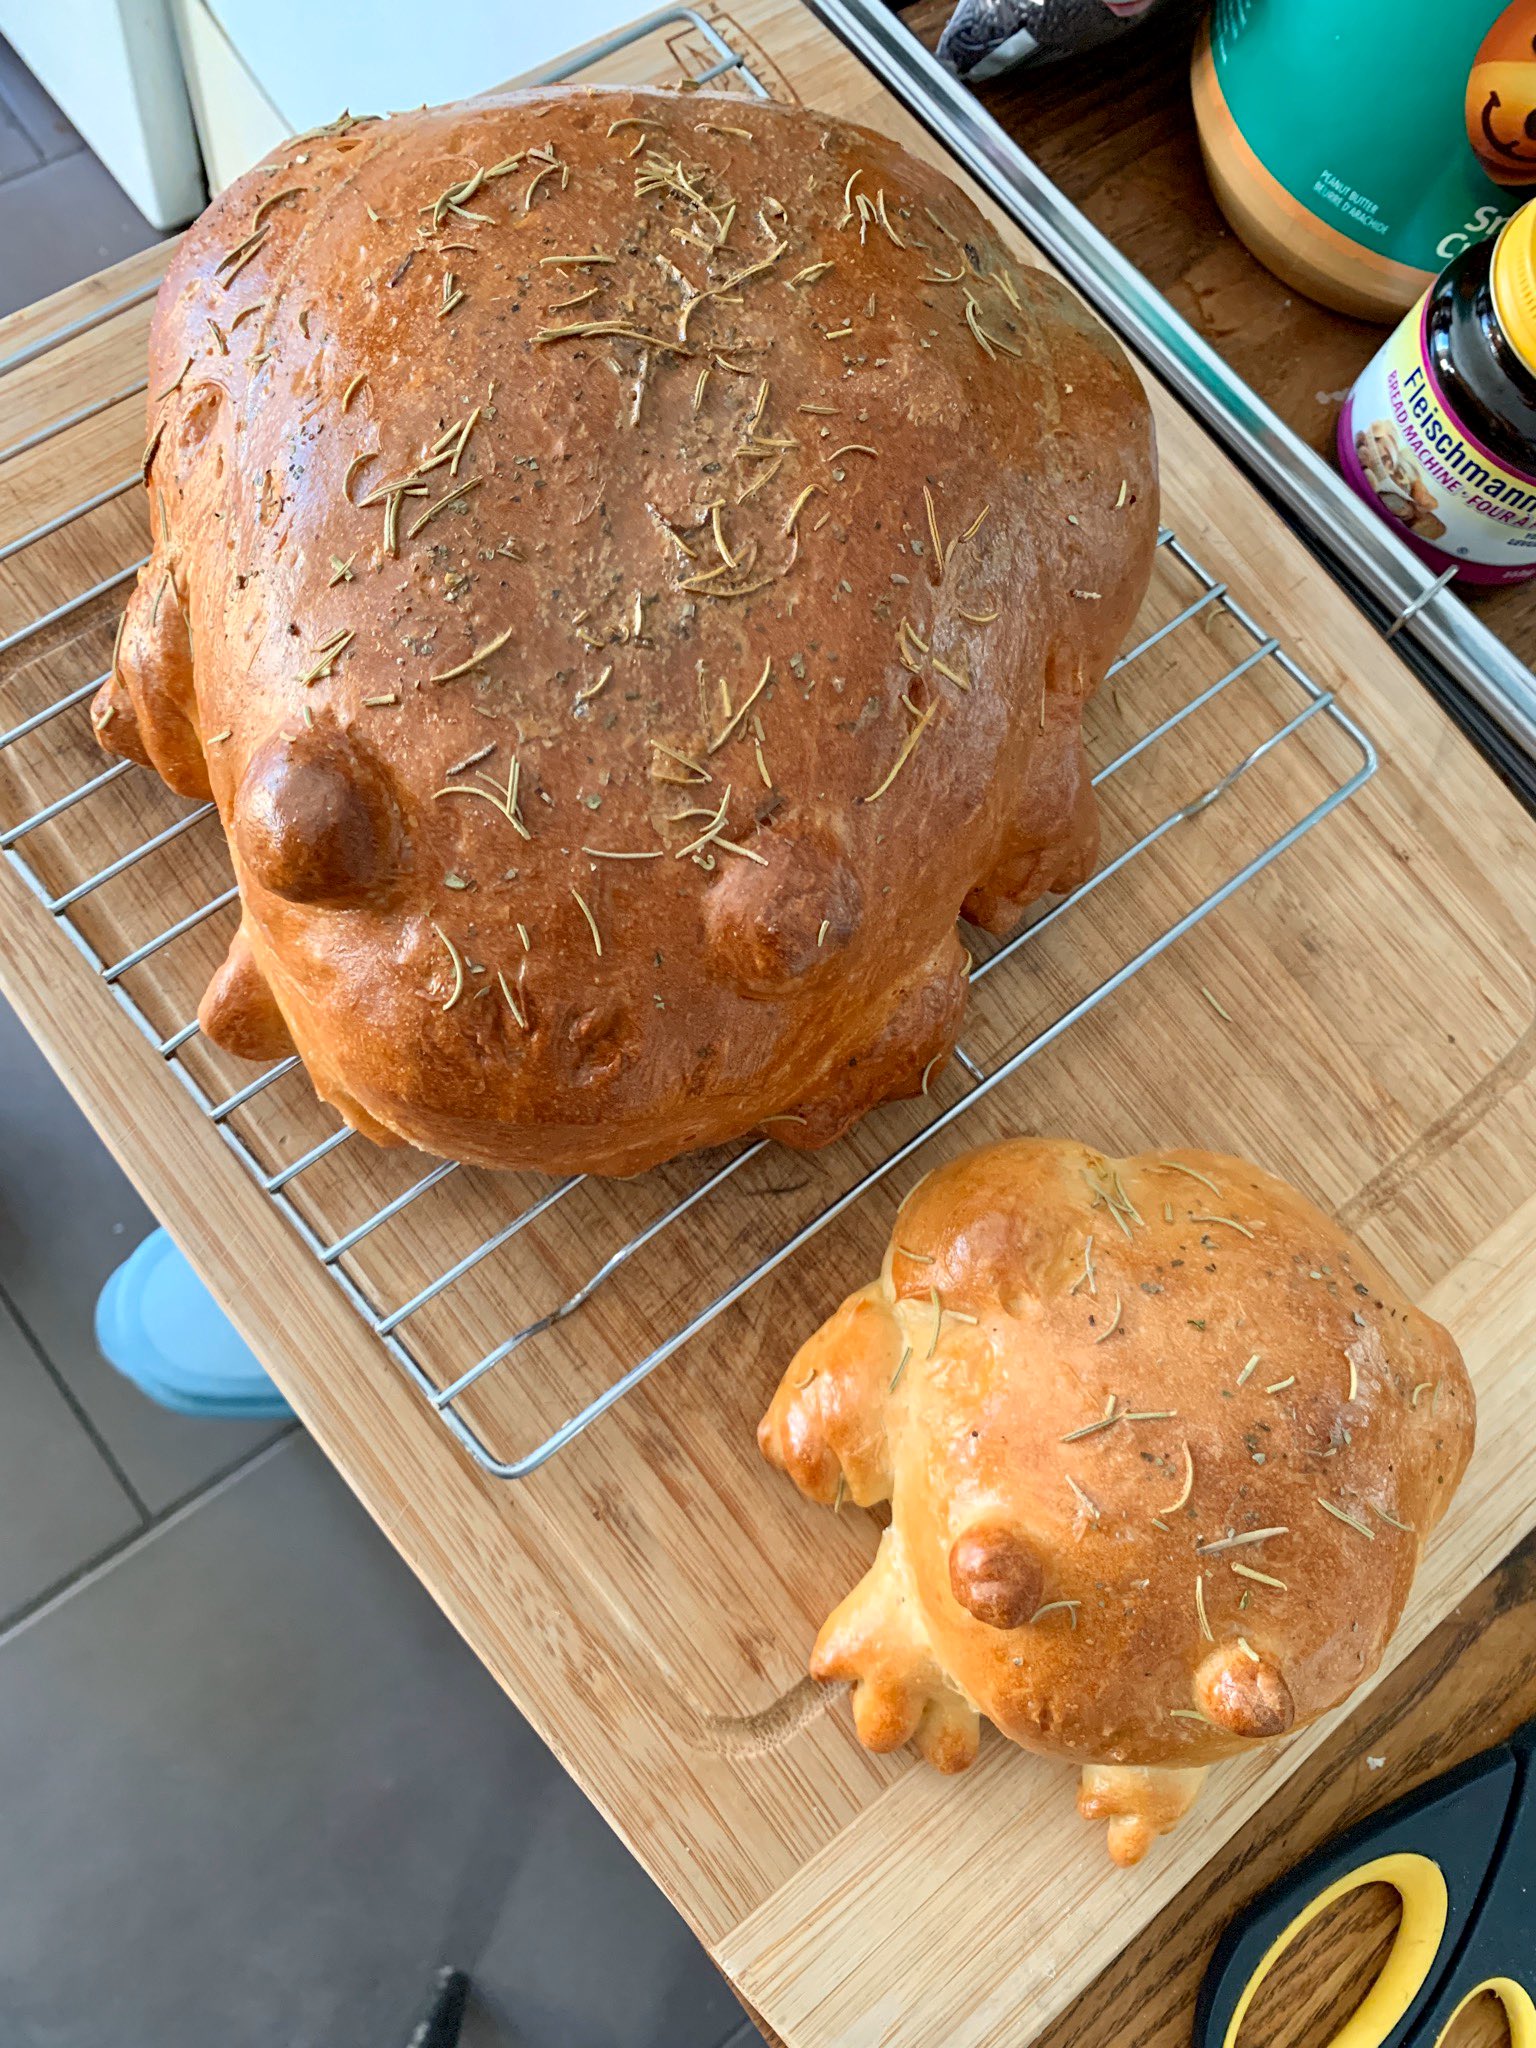 tika on Twitter: "I made frog bread today and SEROTONIN IS H E R E https://t.co/kfPJ9MoCr5" / Twitter